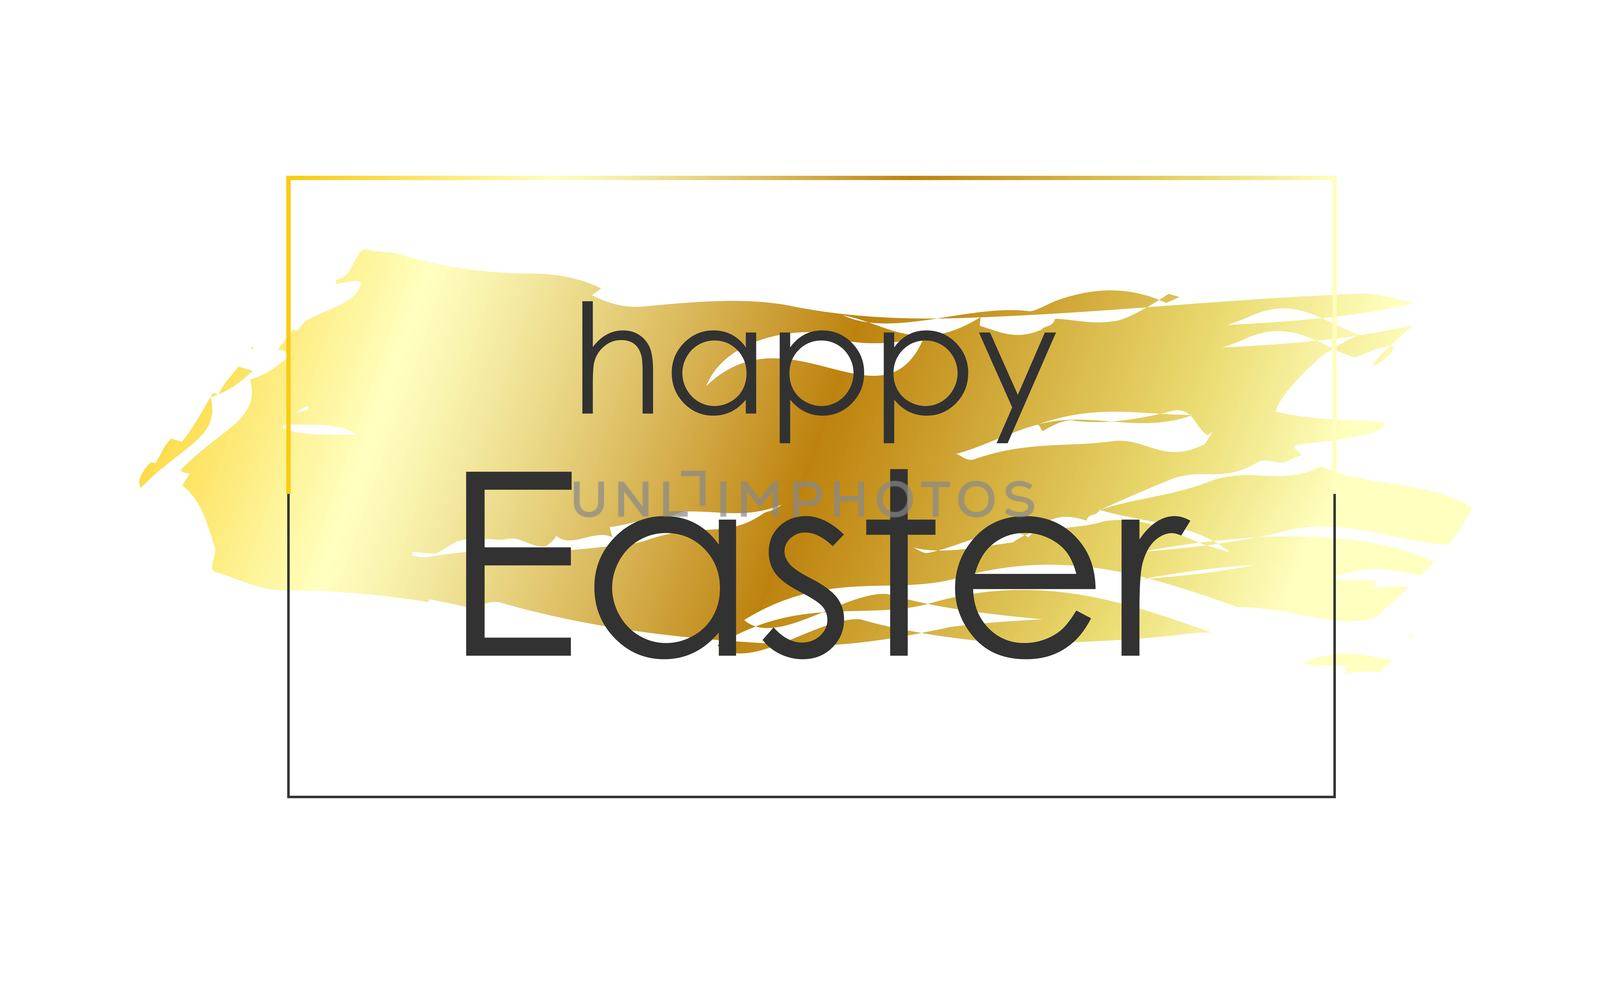 Elegant trendy inscription Happy Easter on a gold background. illustration isolated on white. Easter banner for magazine or promotion.